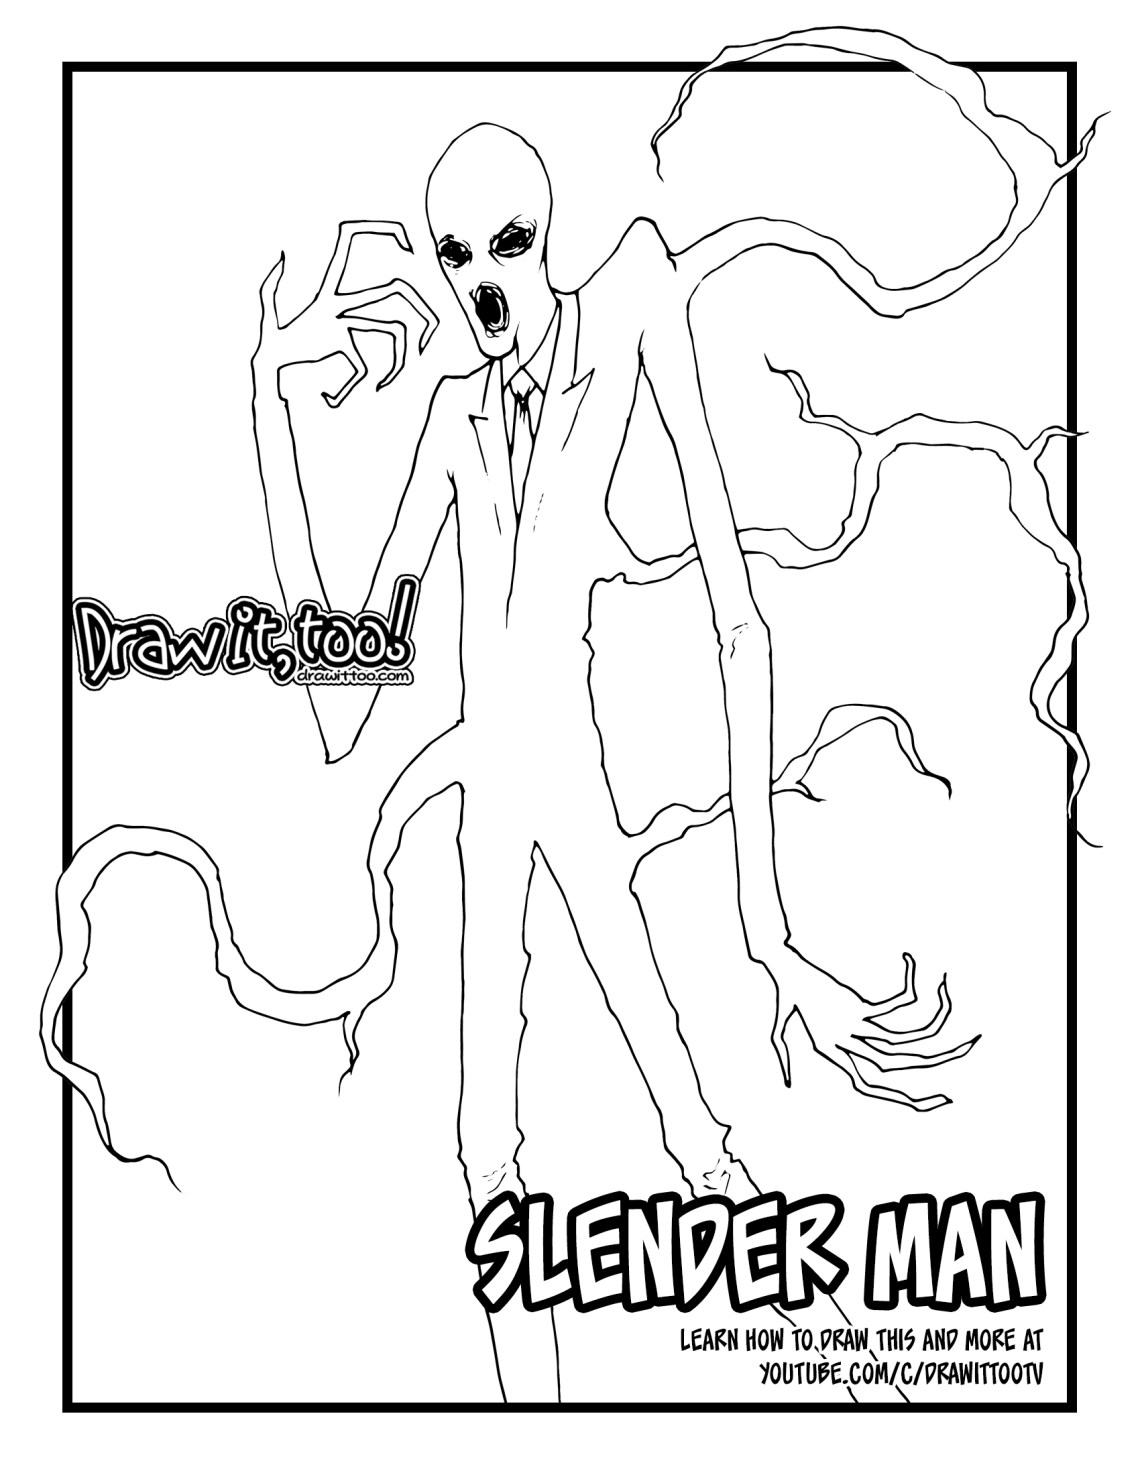 How to Draw The SLENDER MAN | Drawing Tutorial | Draw it, Too!